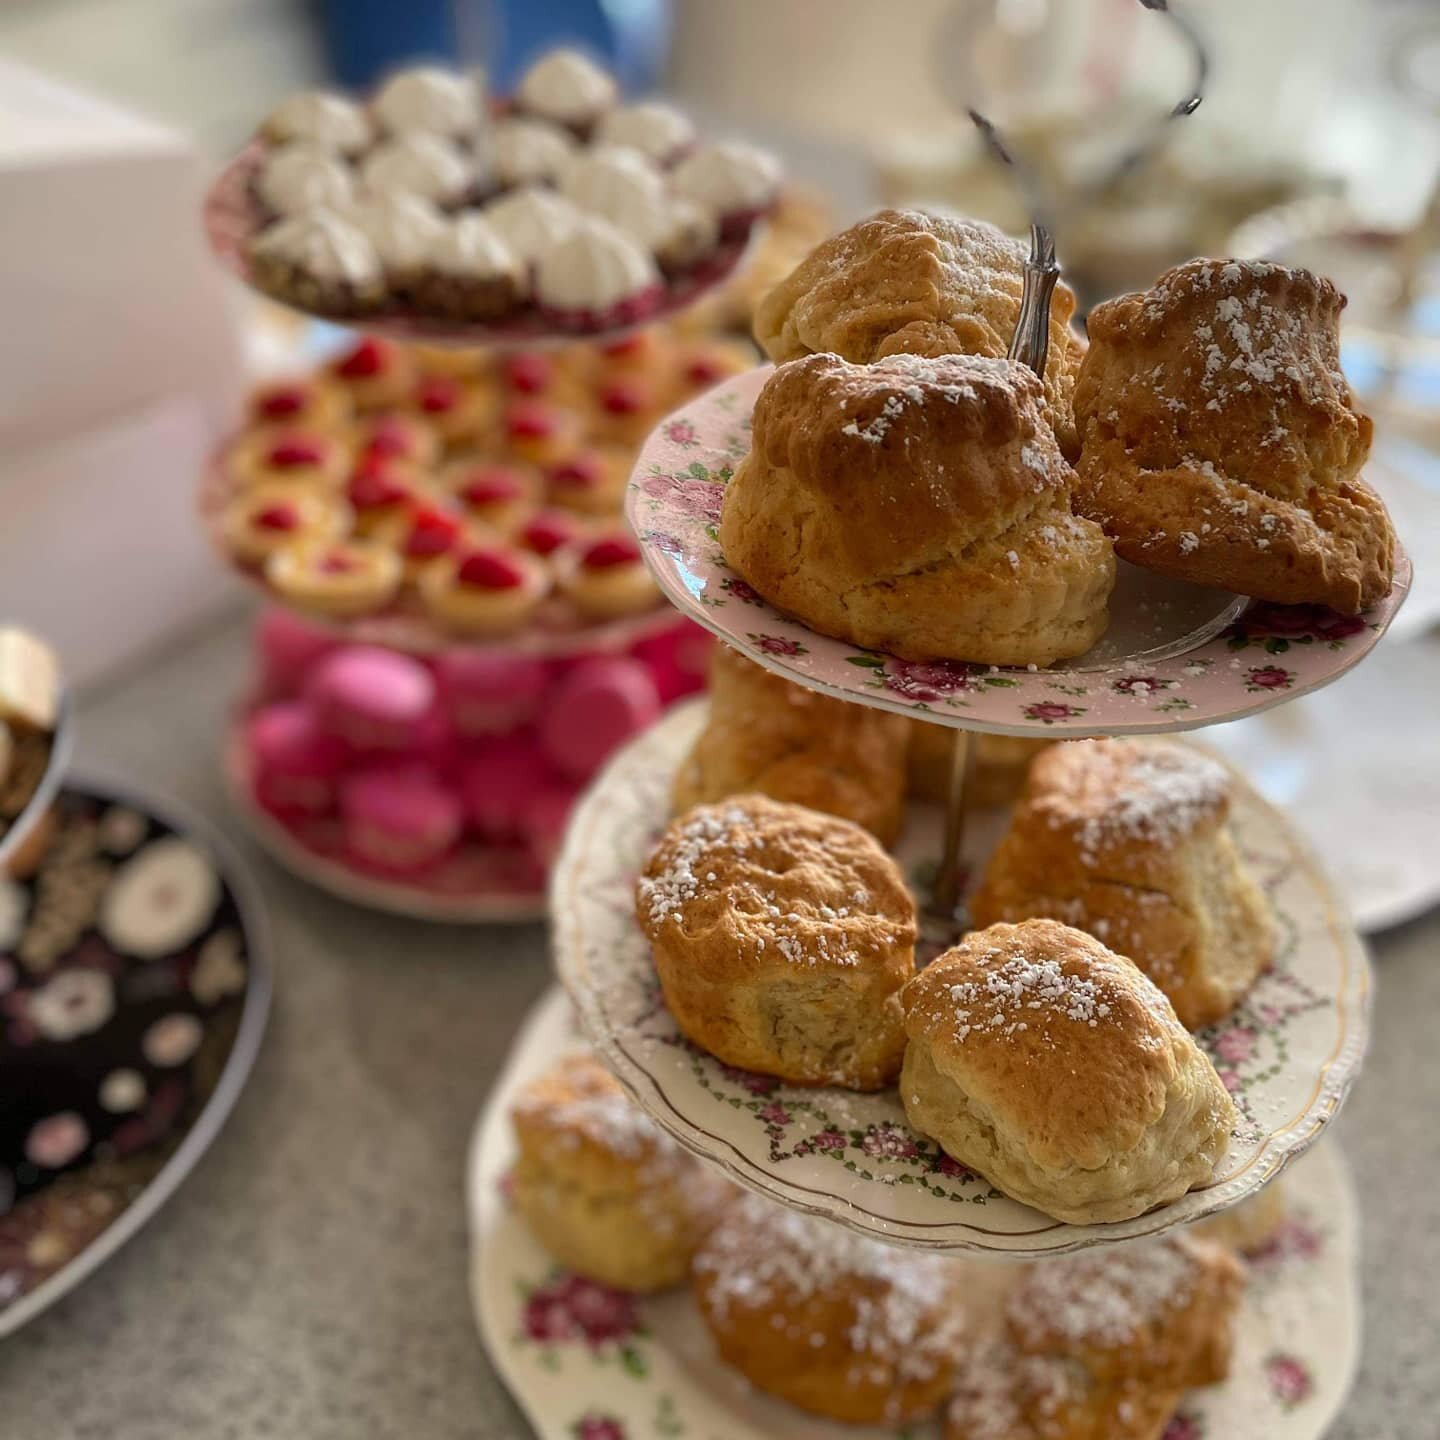 Another successful delivery of High Tea treats to the home of a delighted customer x
Your Vintage Occasion- Tea Salon Dirty Janes #hightea #catering #scones